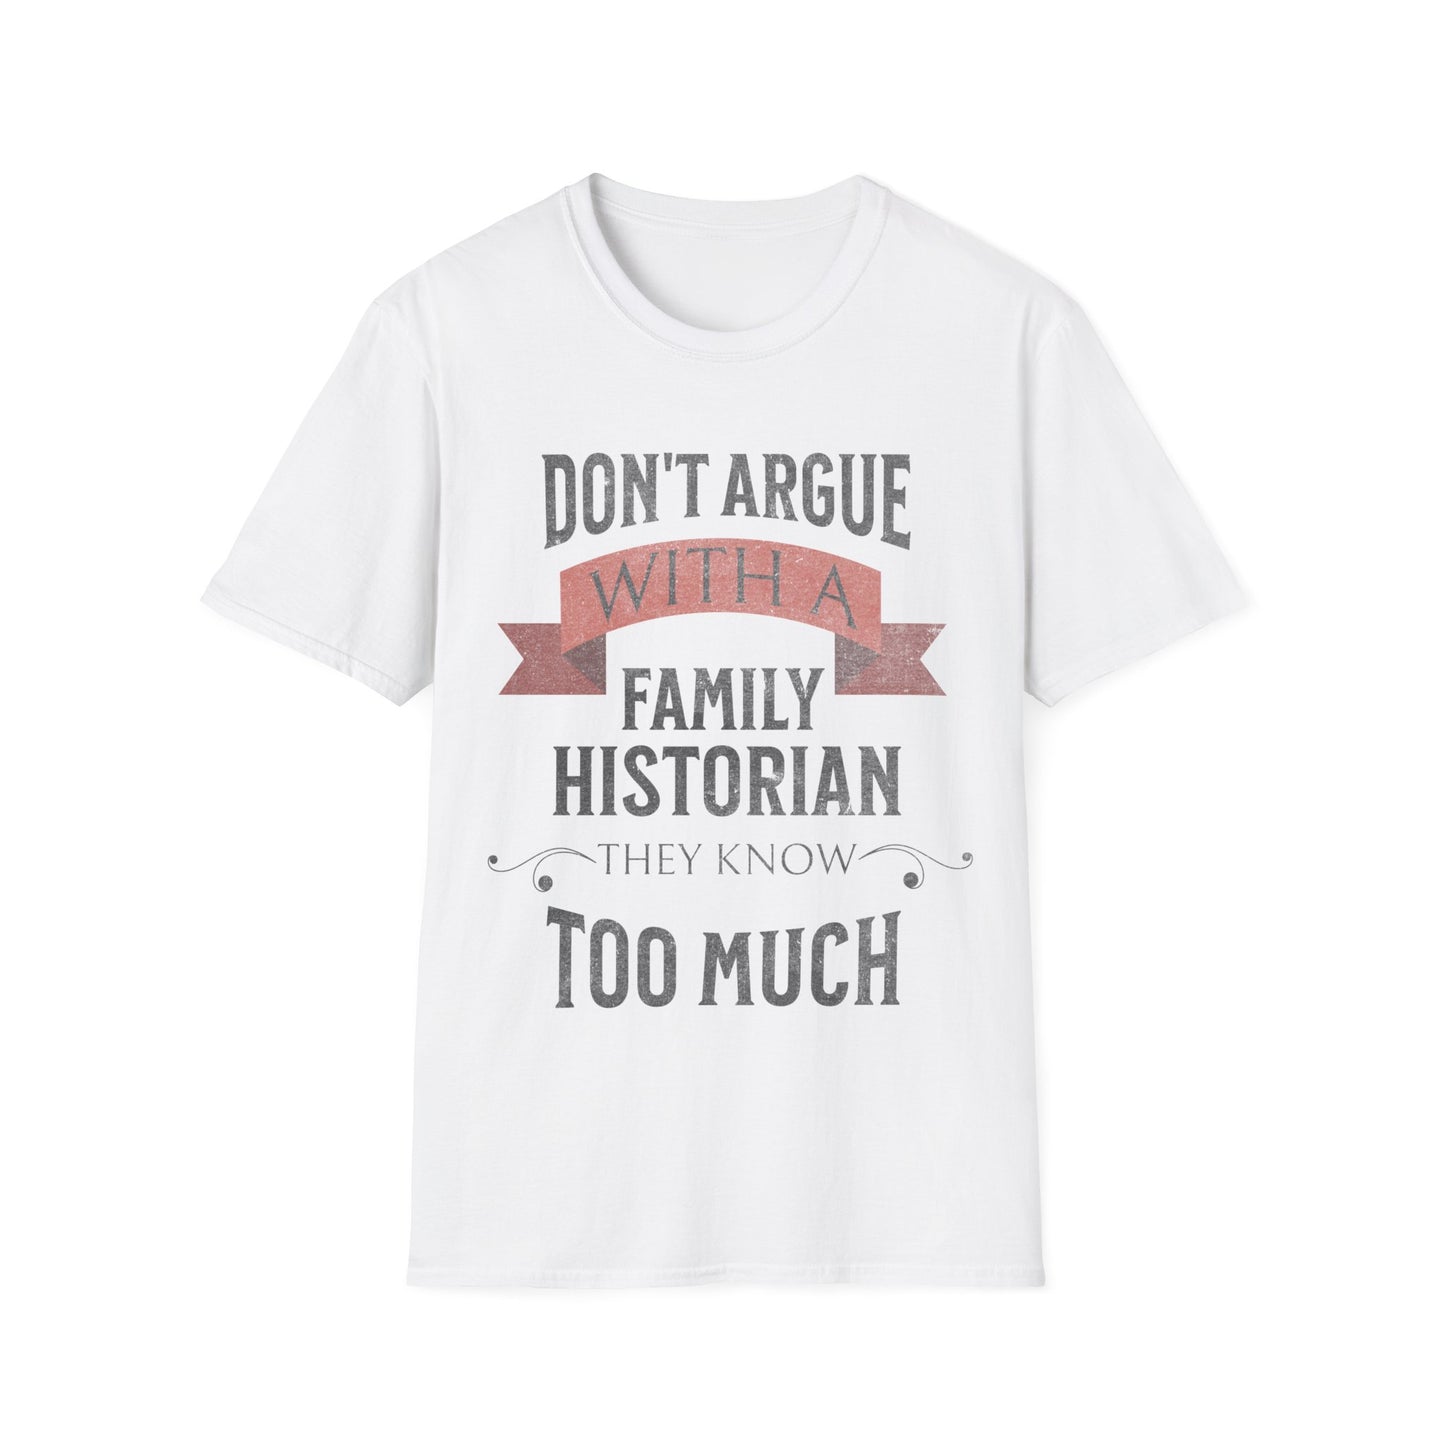 Don't Argue with a Family Historian T-Shirt